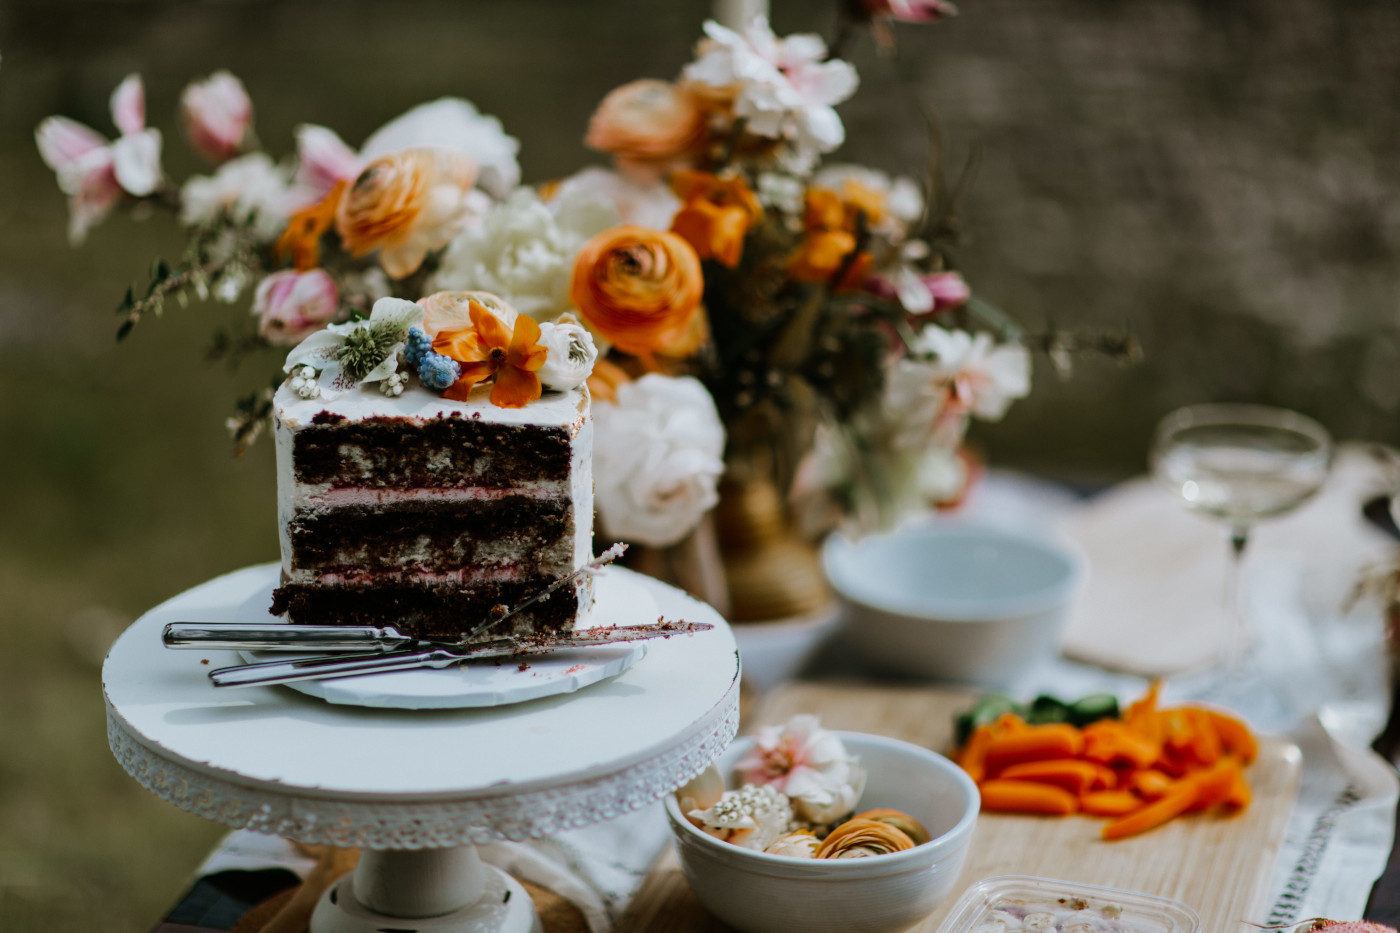 Allison and Lennie's cake. Elopement photography at Columbia River Gorge by Sienna Plus Josh.